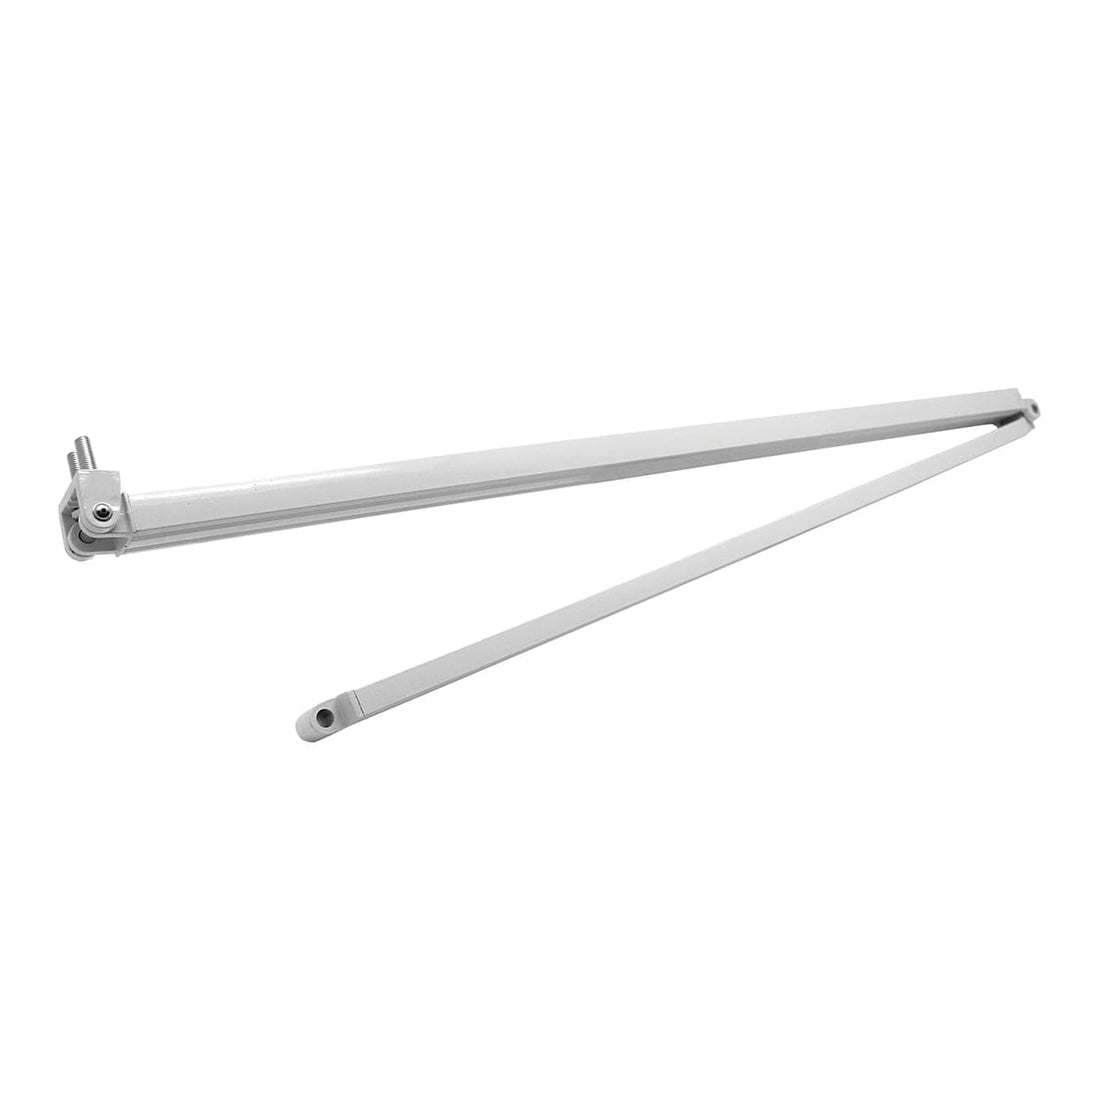 PAIR OF RIGHT/LEFT ARMS FOR BQ AND SEMIC AWNING - best price from Maltashopper.com BR440001812